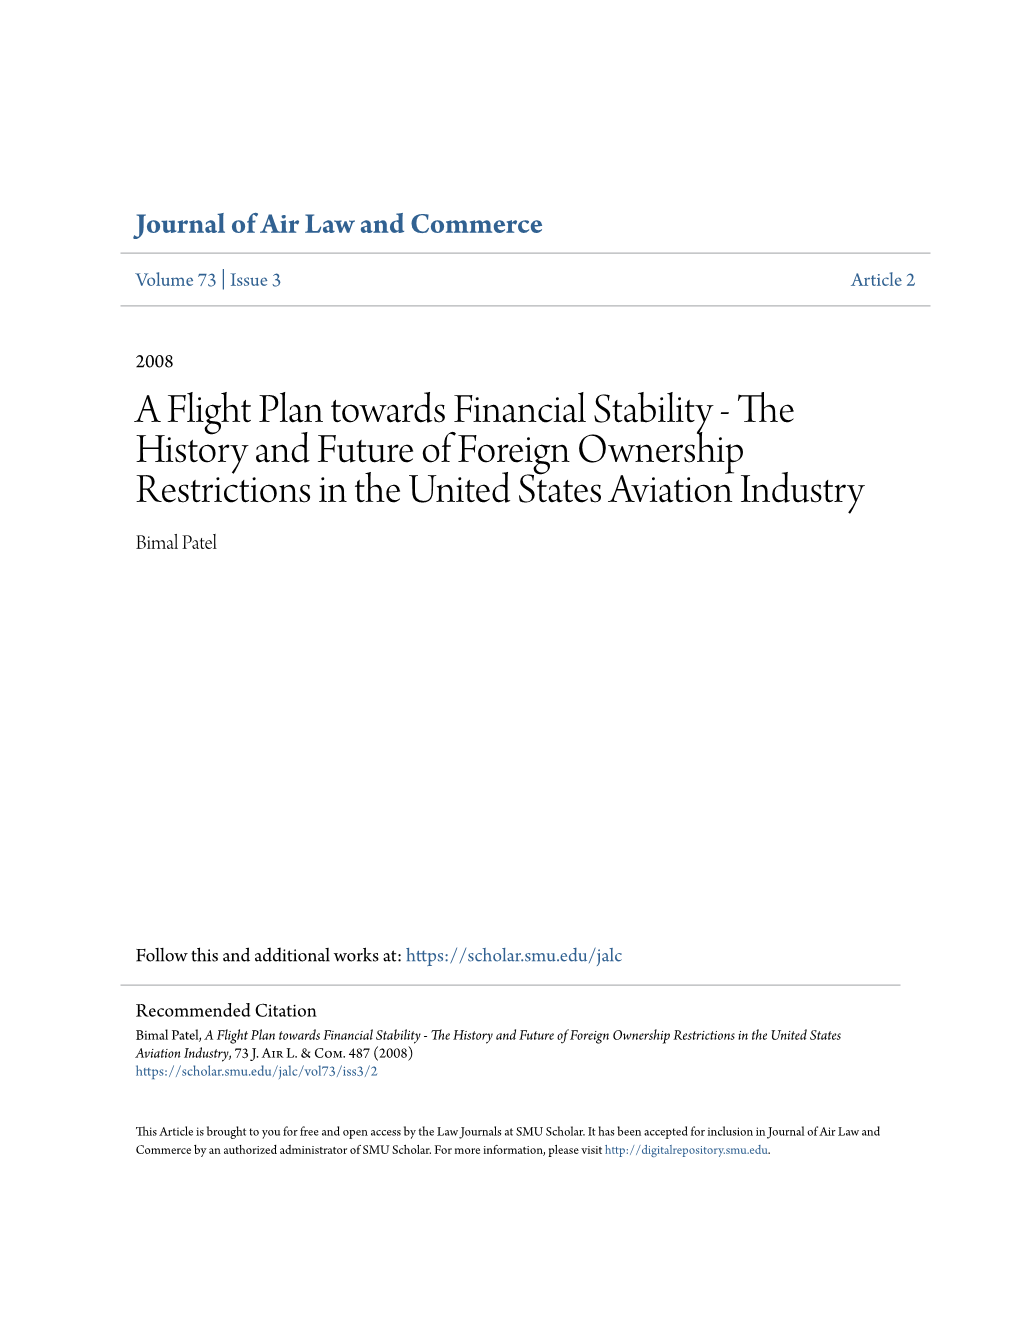 The History and Future of Foreign Ownership Restrictions in the United States Aviation Industry Bimal Patel